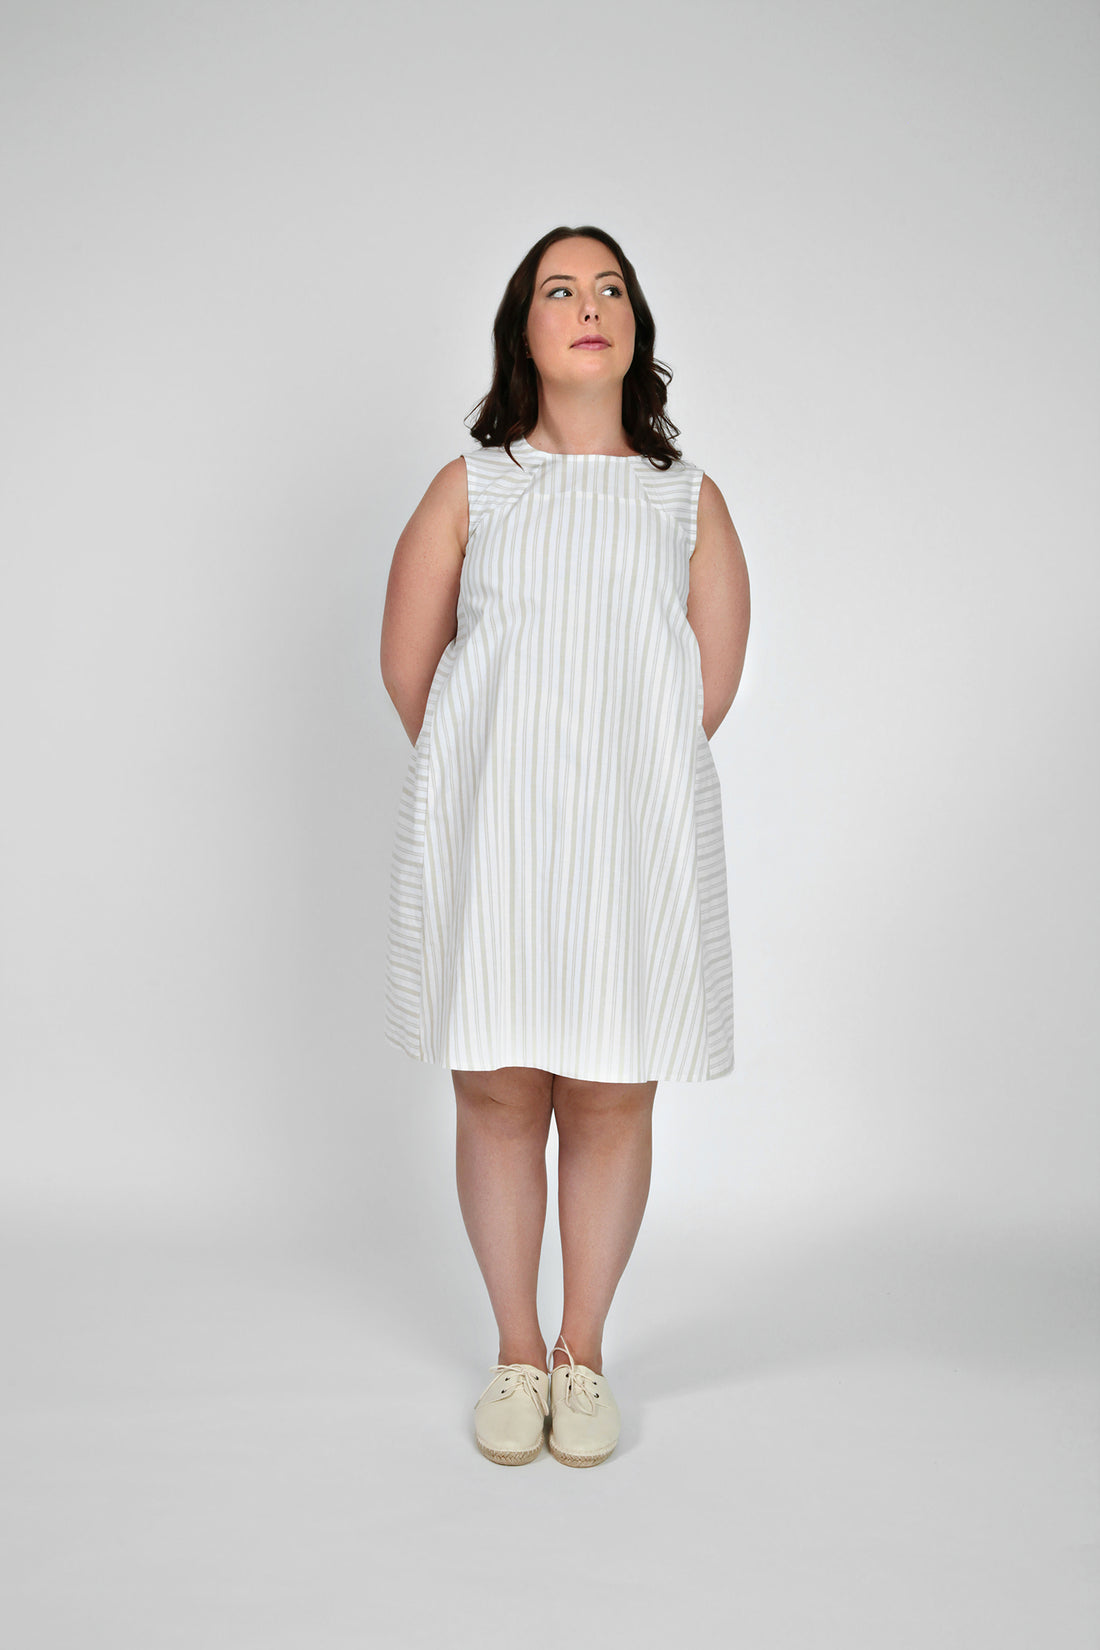 In the Folds - Rushcutter Dress